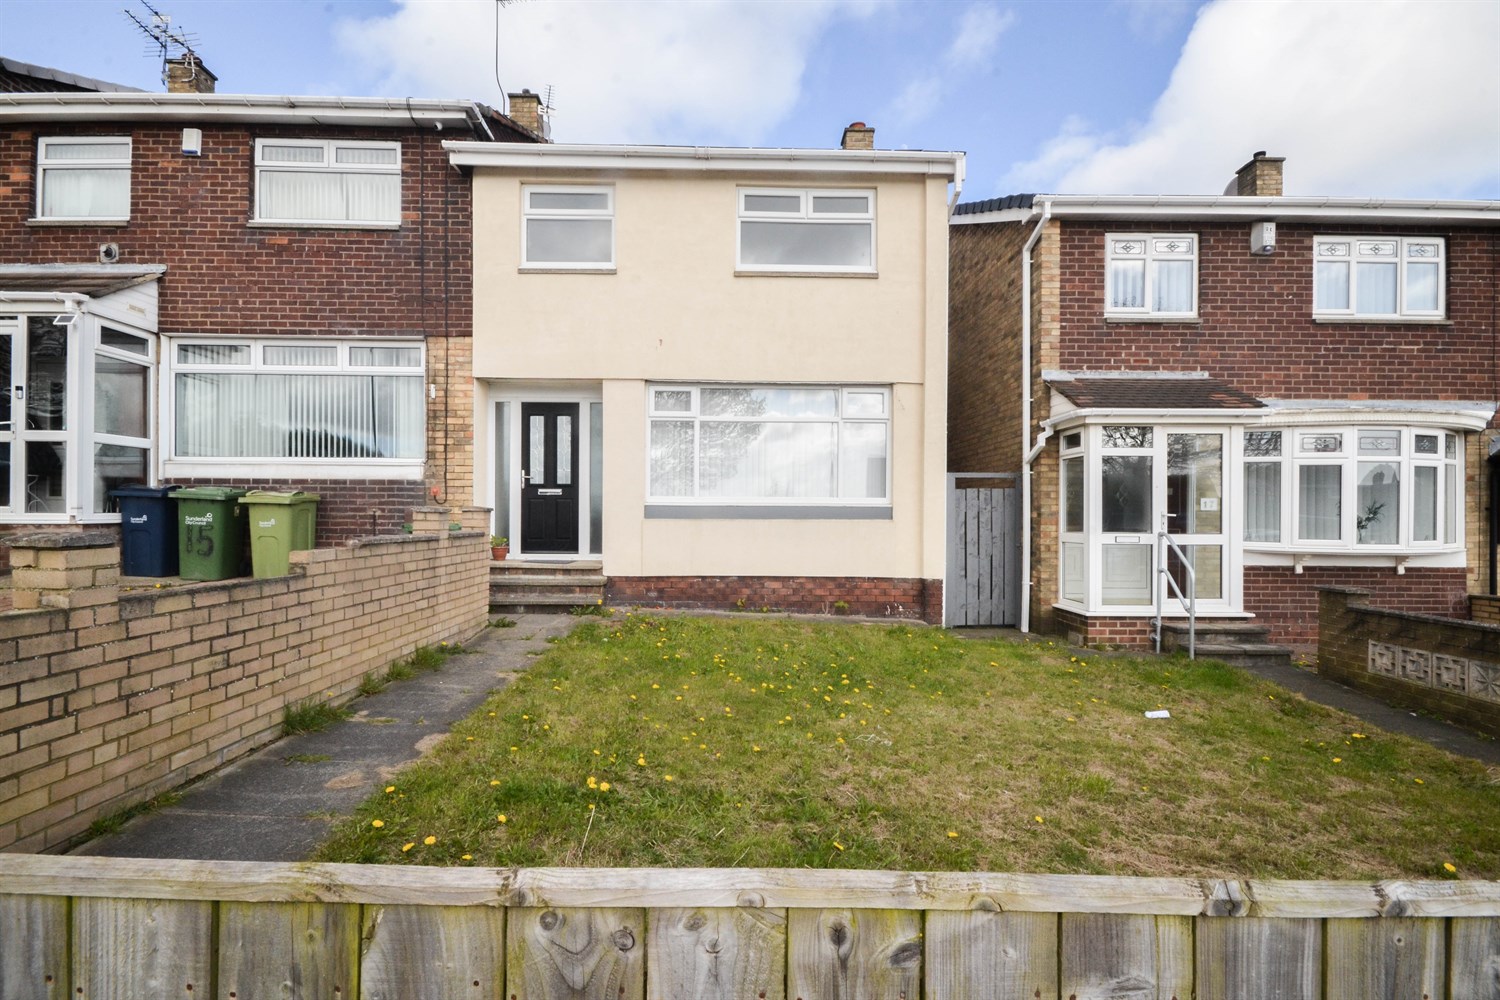 3 bed semi-detached house for sale in Kentucky Road, Sunderland - Property Image 1